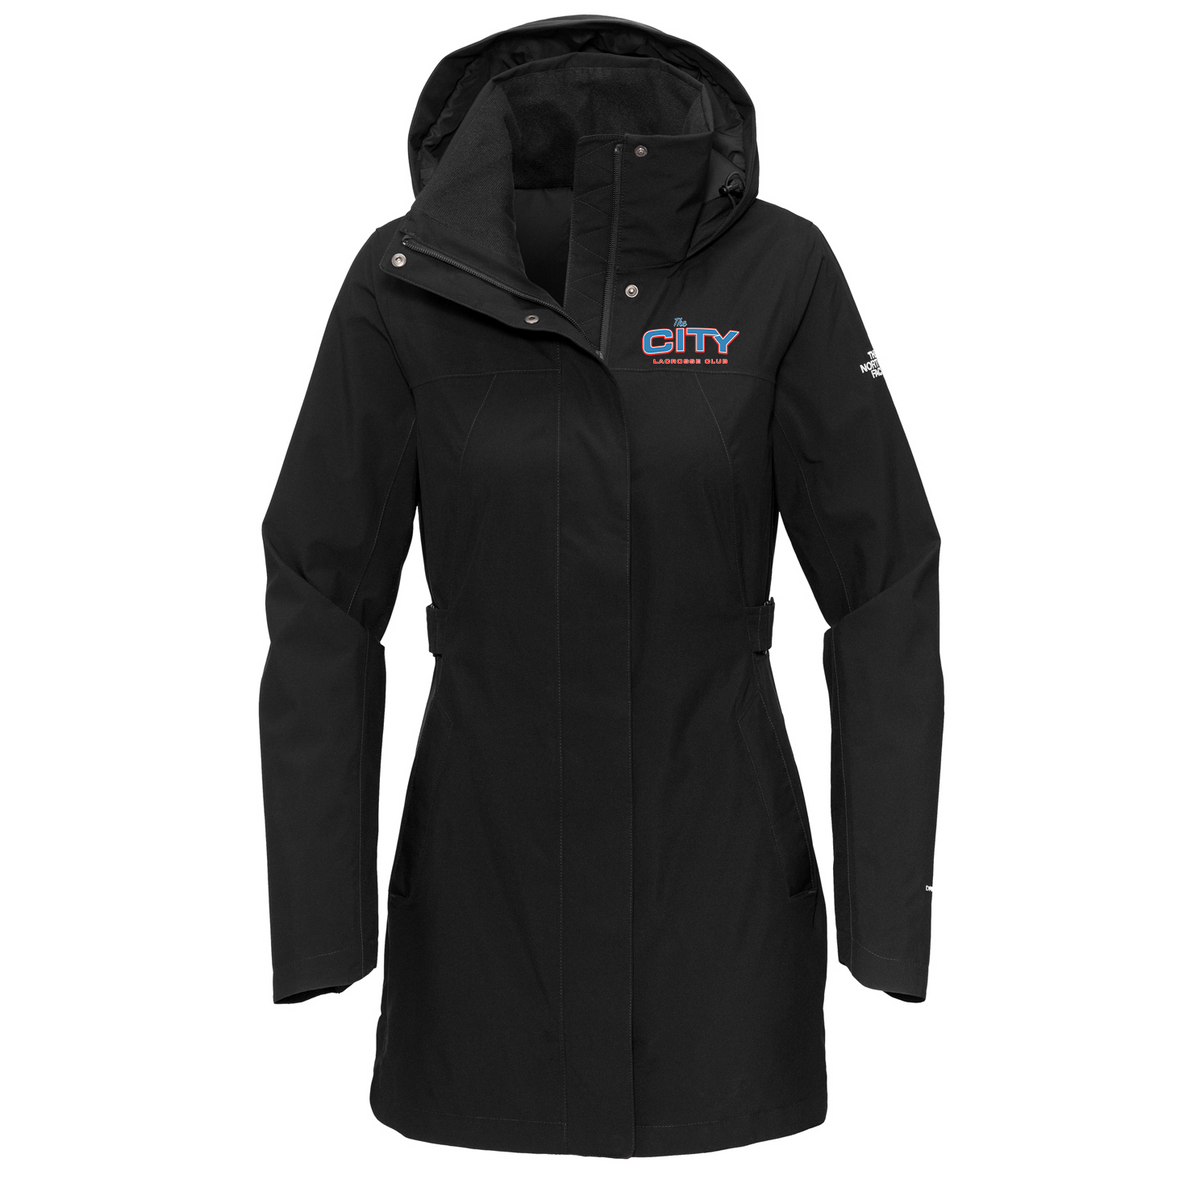 The City Lacrosse Club The North Face Ladies Trench